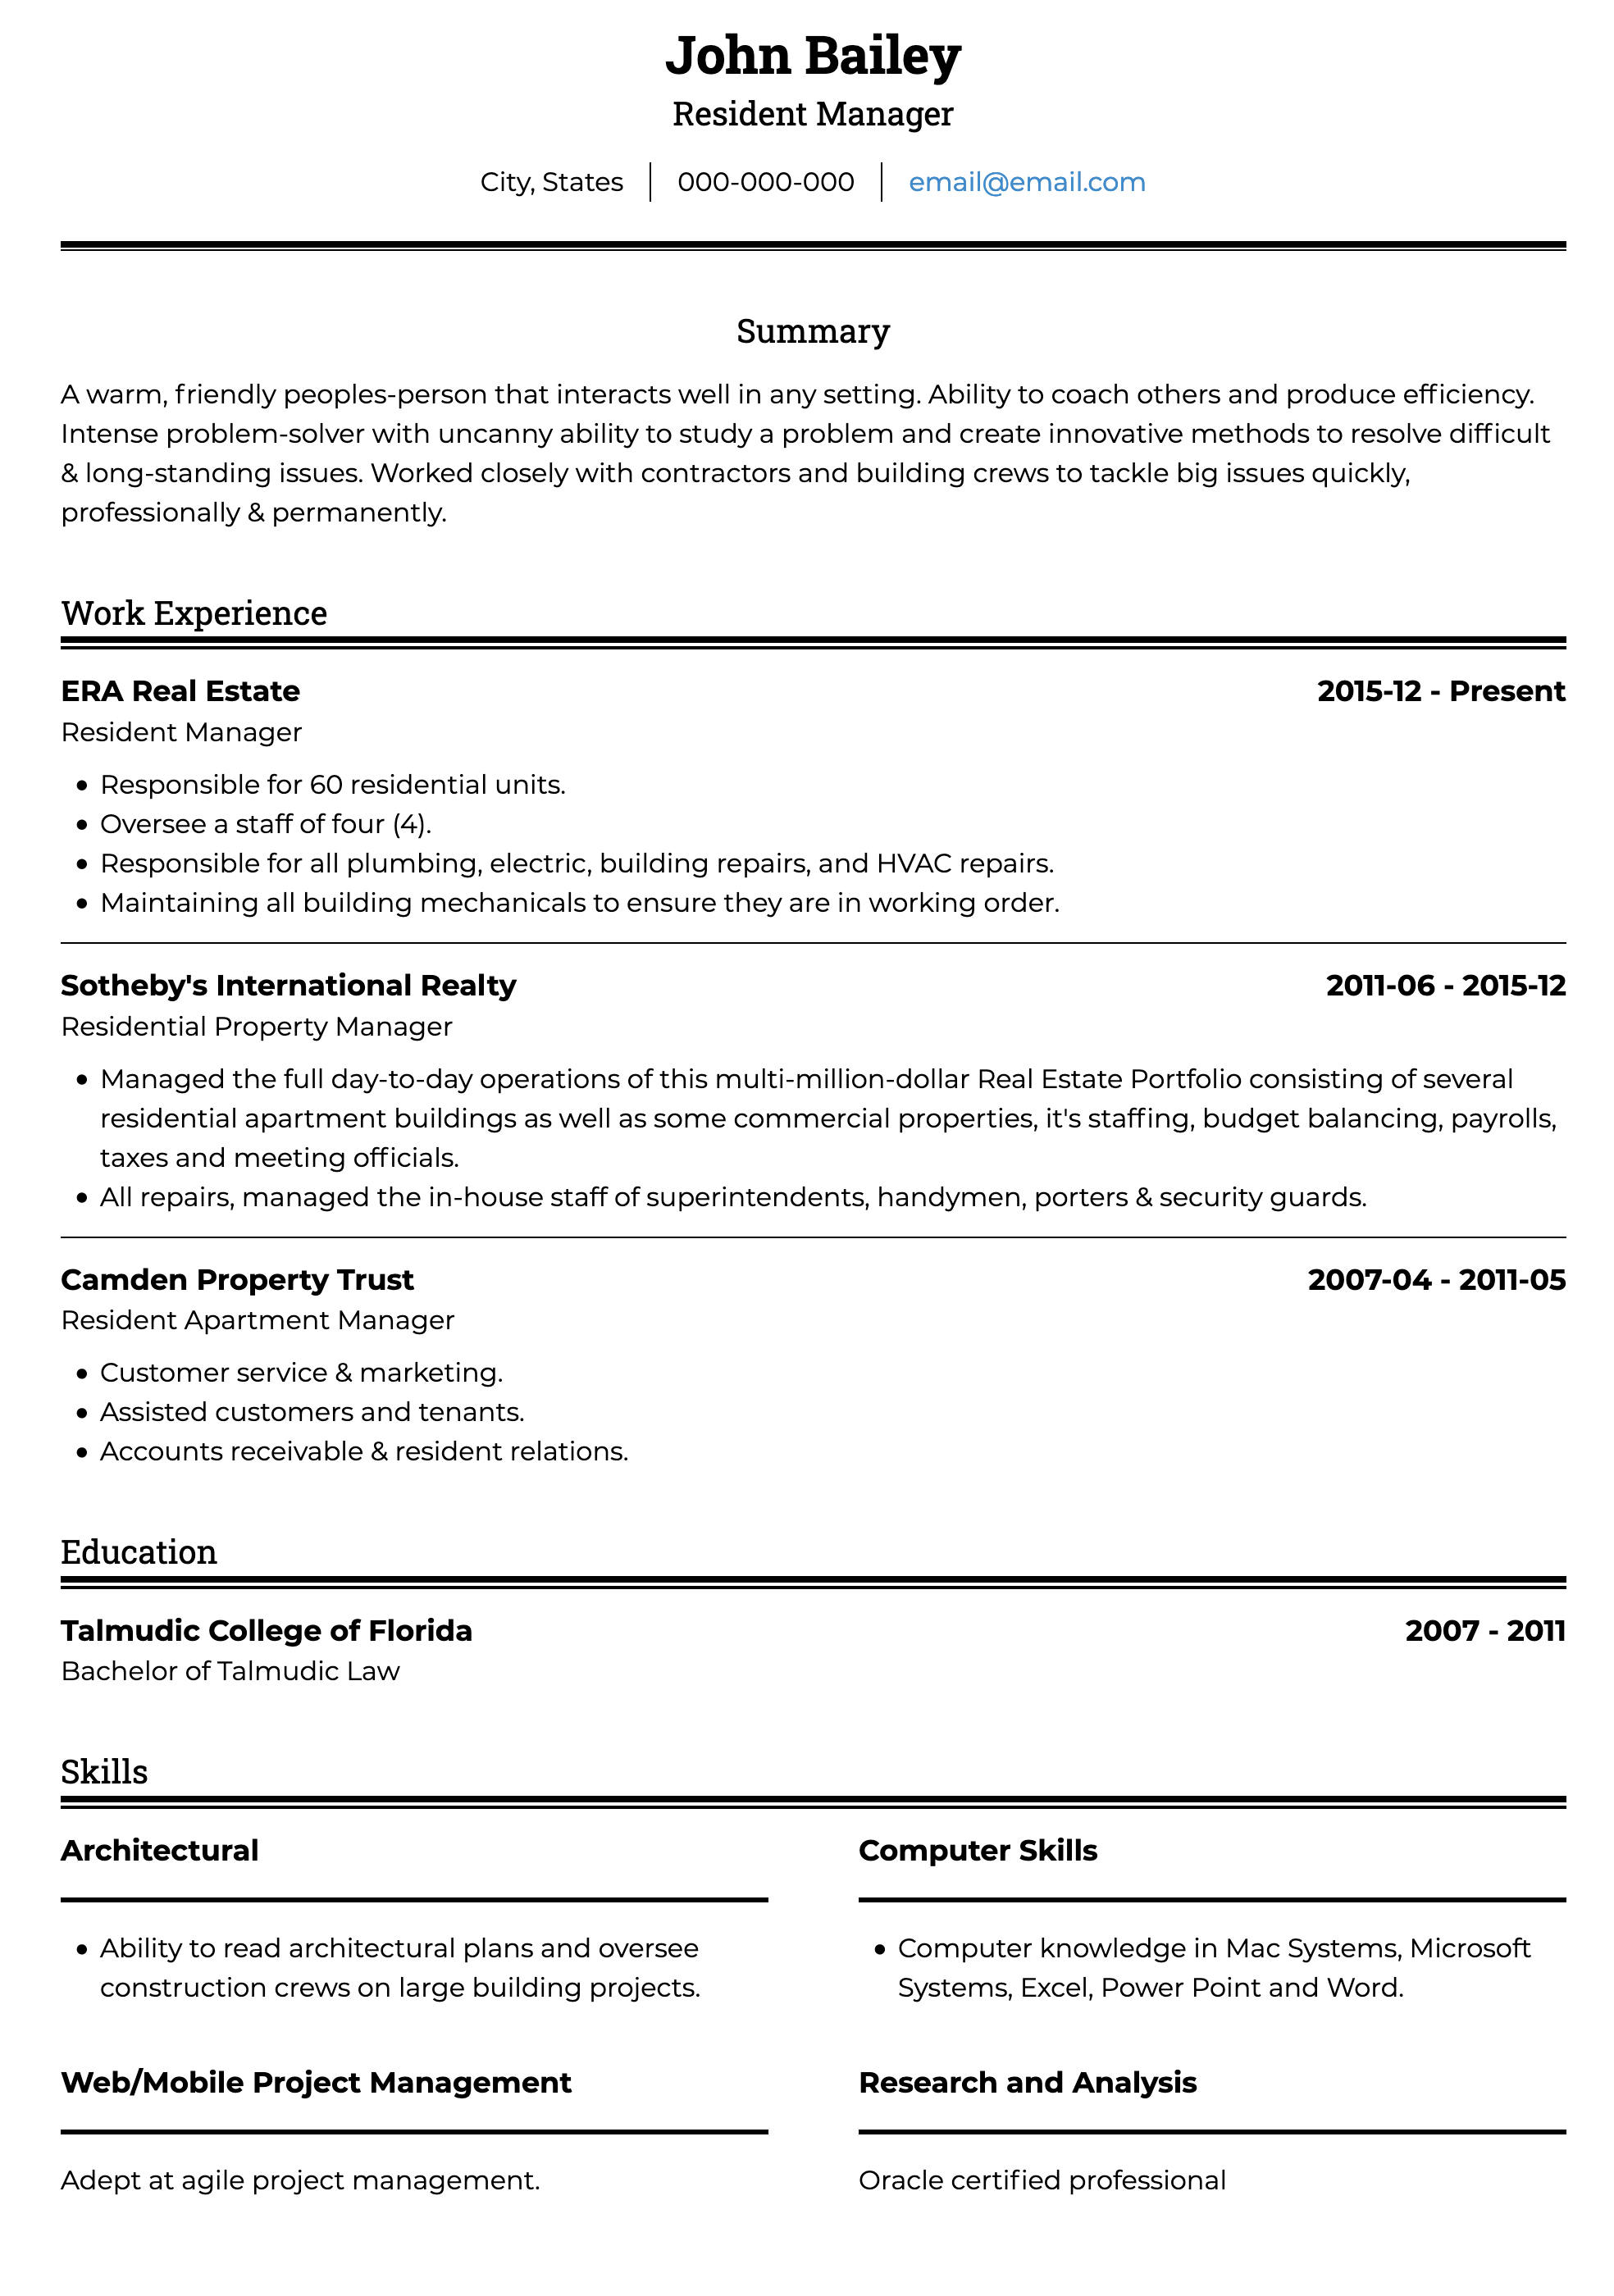 Ats Resume Template Cool Writing An Attractive Ats Resume Resume Template Resume Overused